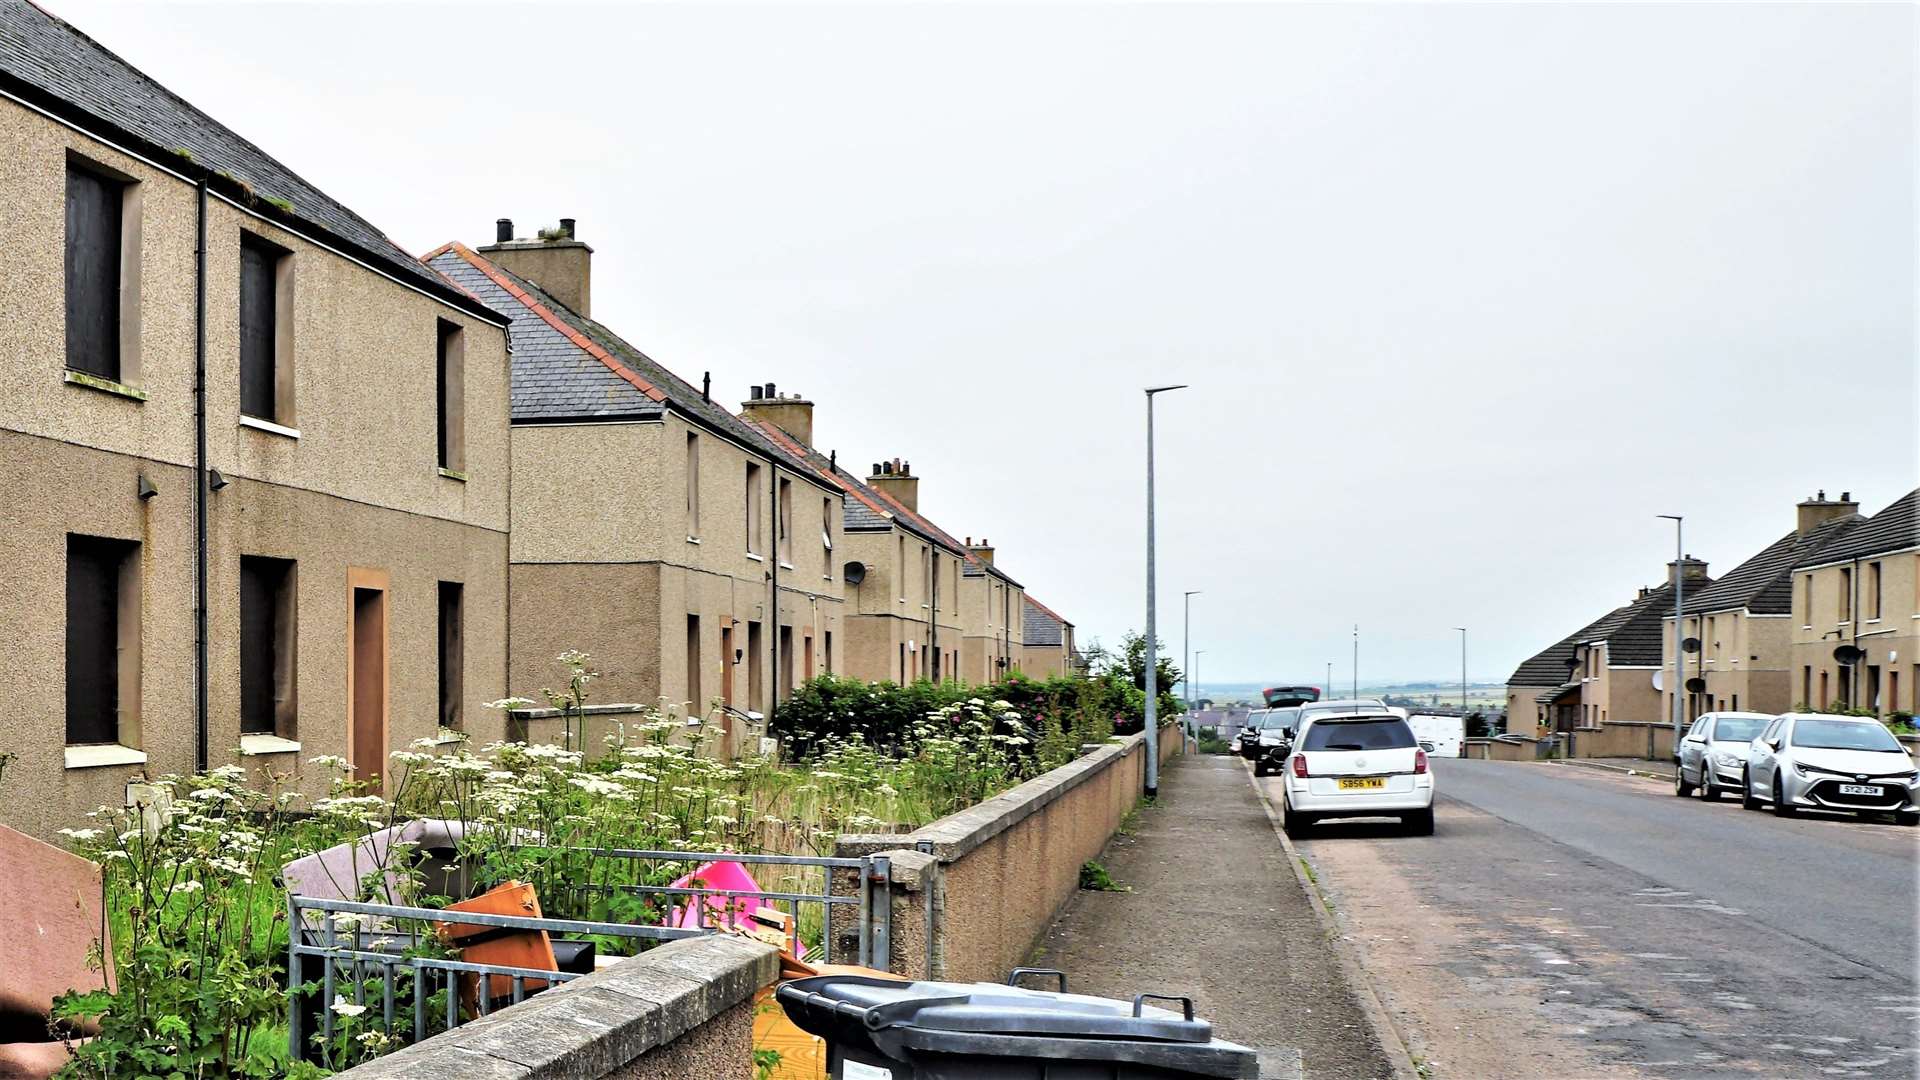 Council tenants at Kennedy Terrace in Wick may benefit from the funding. Picture: DGS